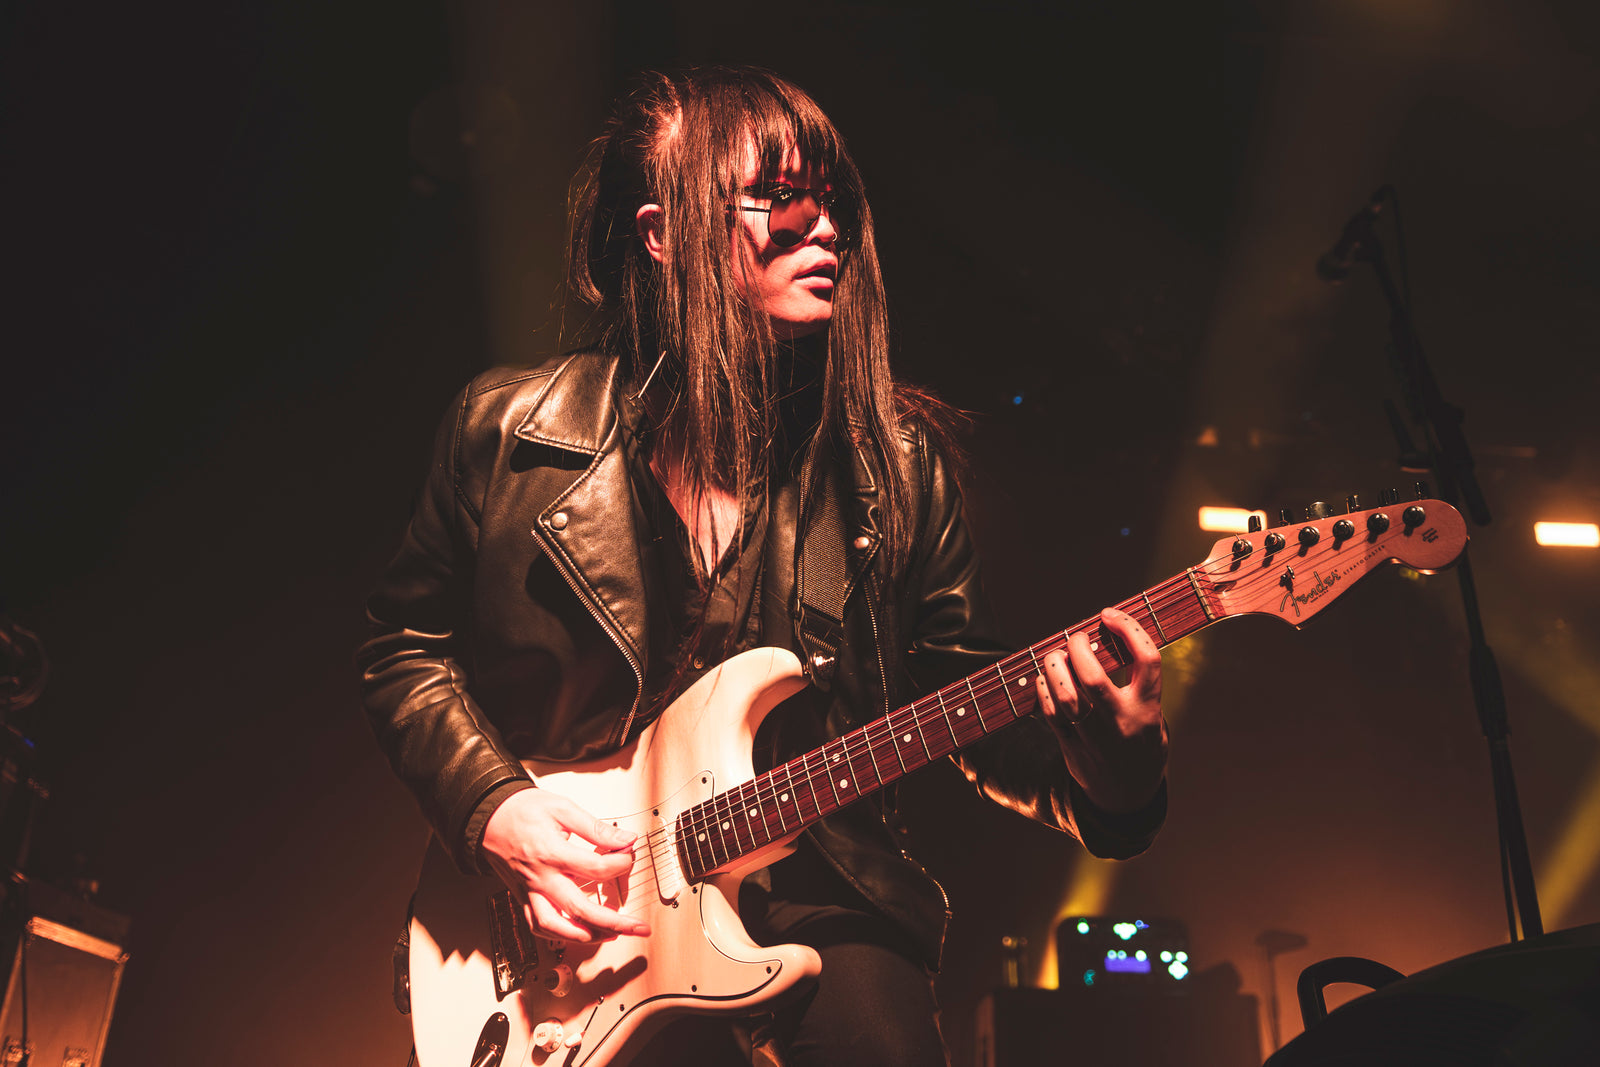 Kai (The Sisters of Mercy guitarist)